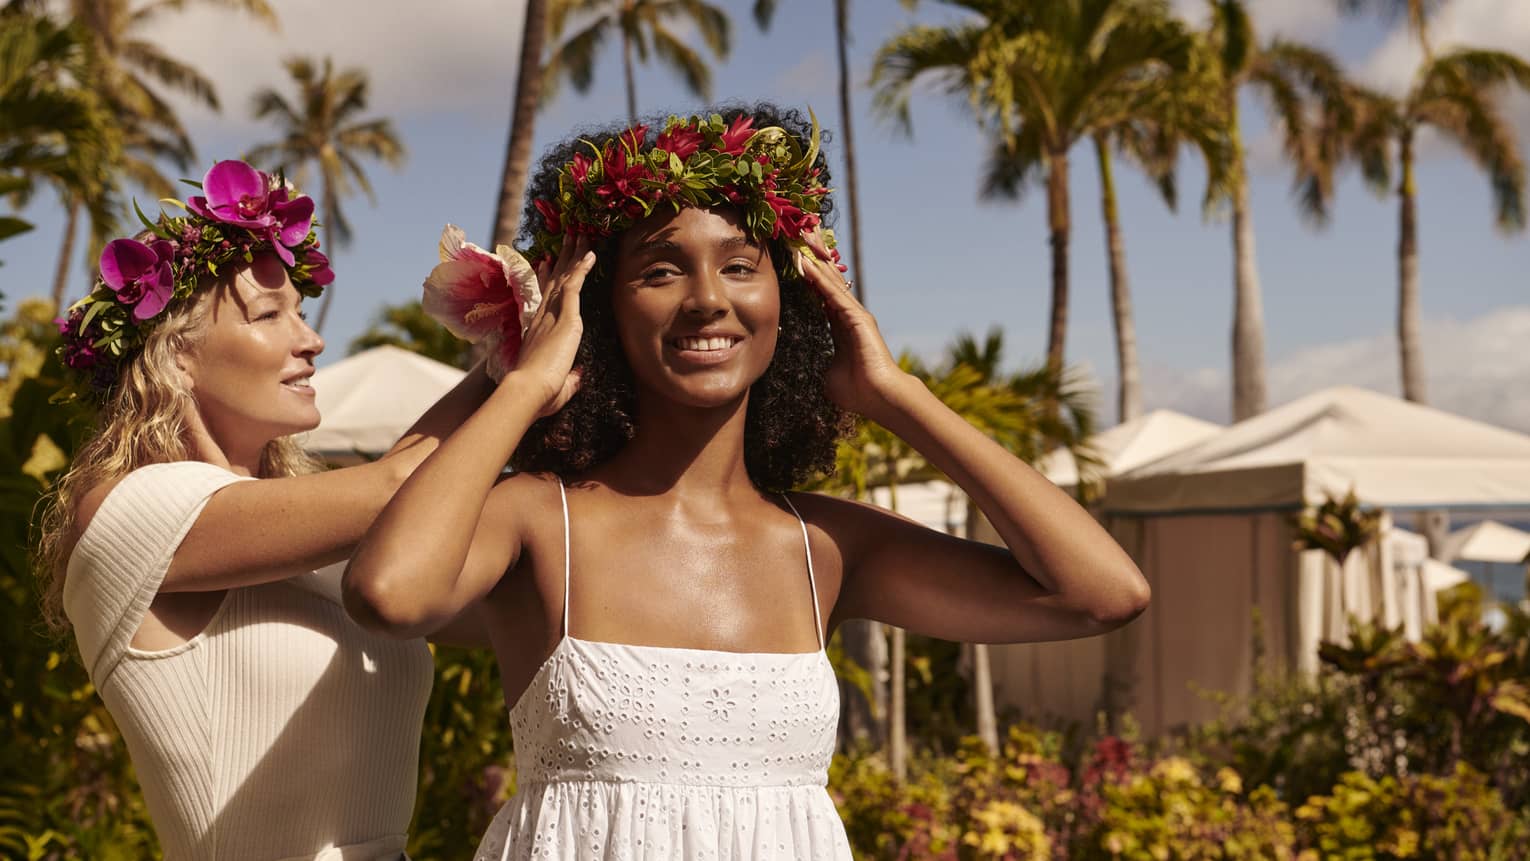 Woman puts a floral lei headpiece on another woman